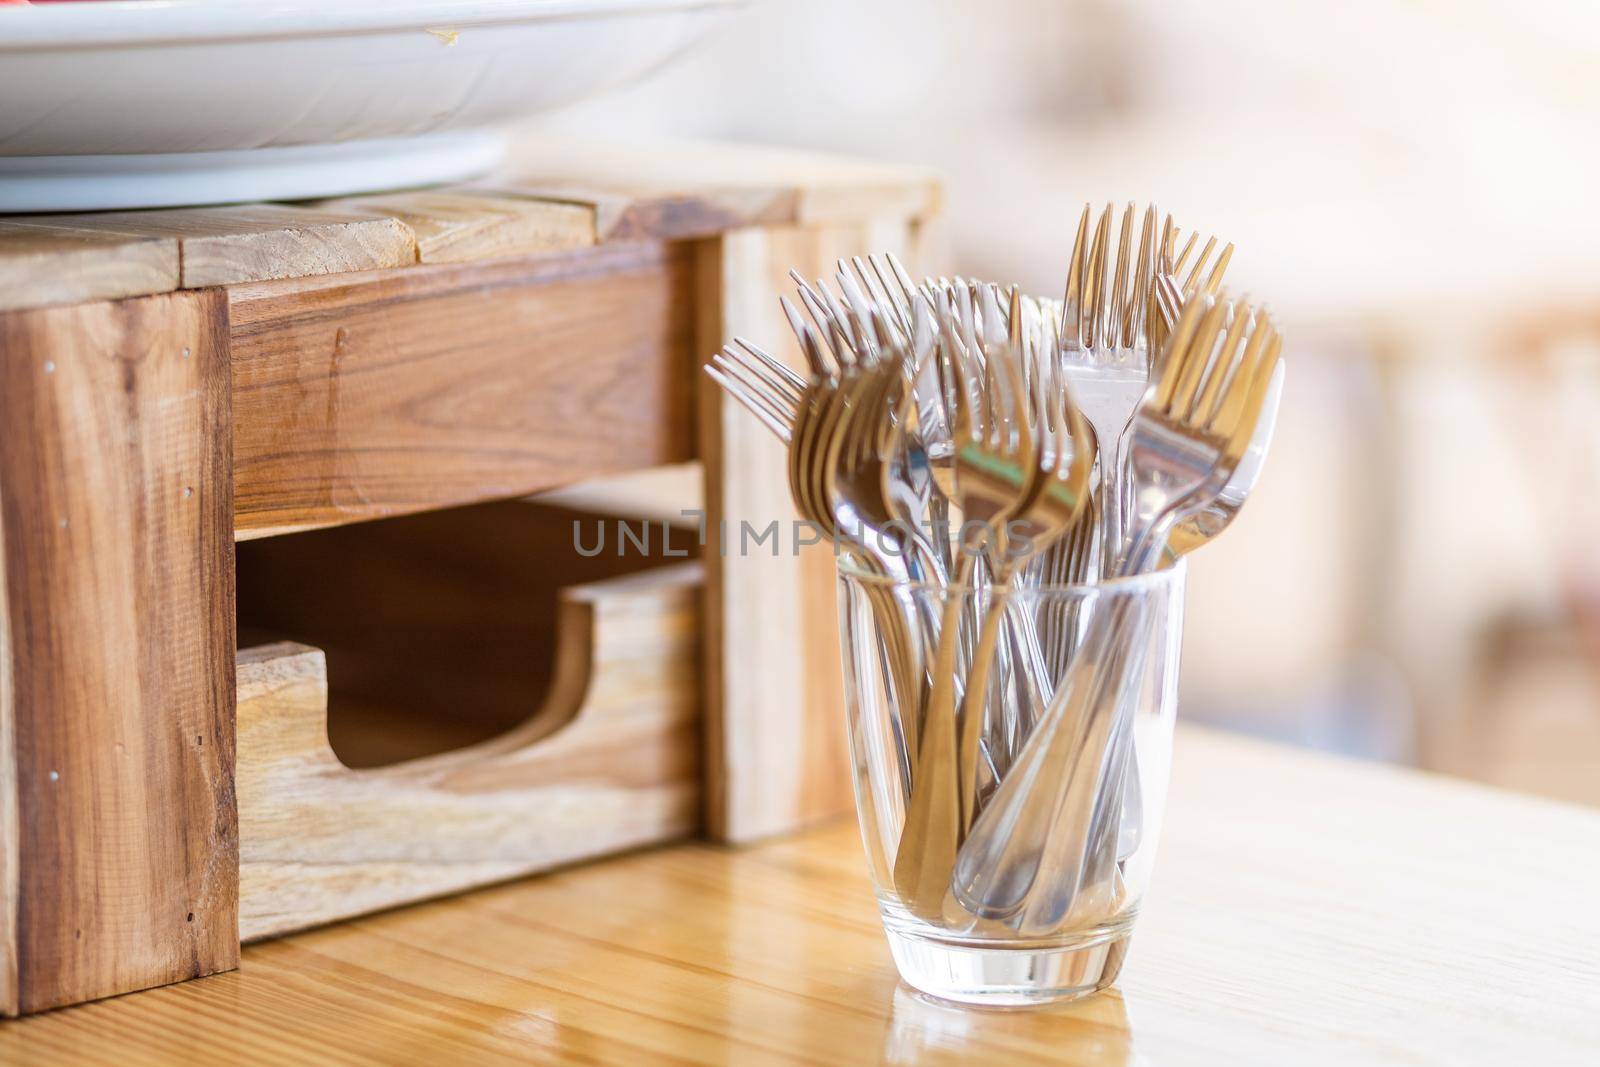 Many fork are placed with In the glass on the dining table decoration in hotel